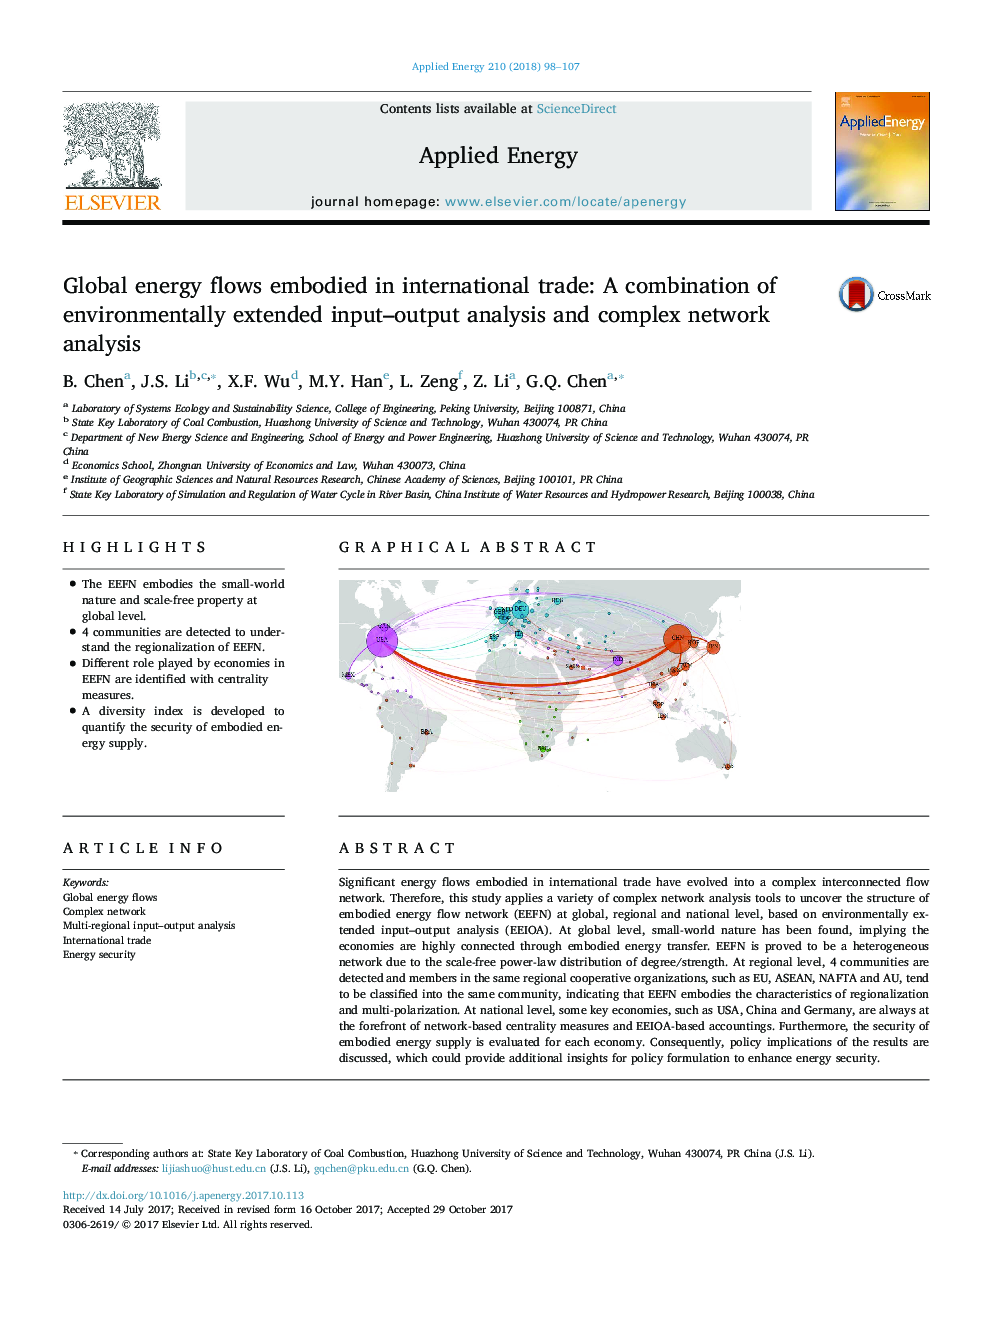 Global energy flows embodied in international trade: A combination of environmentally extended input-output analysis and complex network analysis